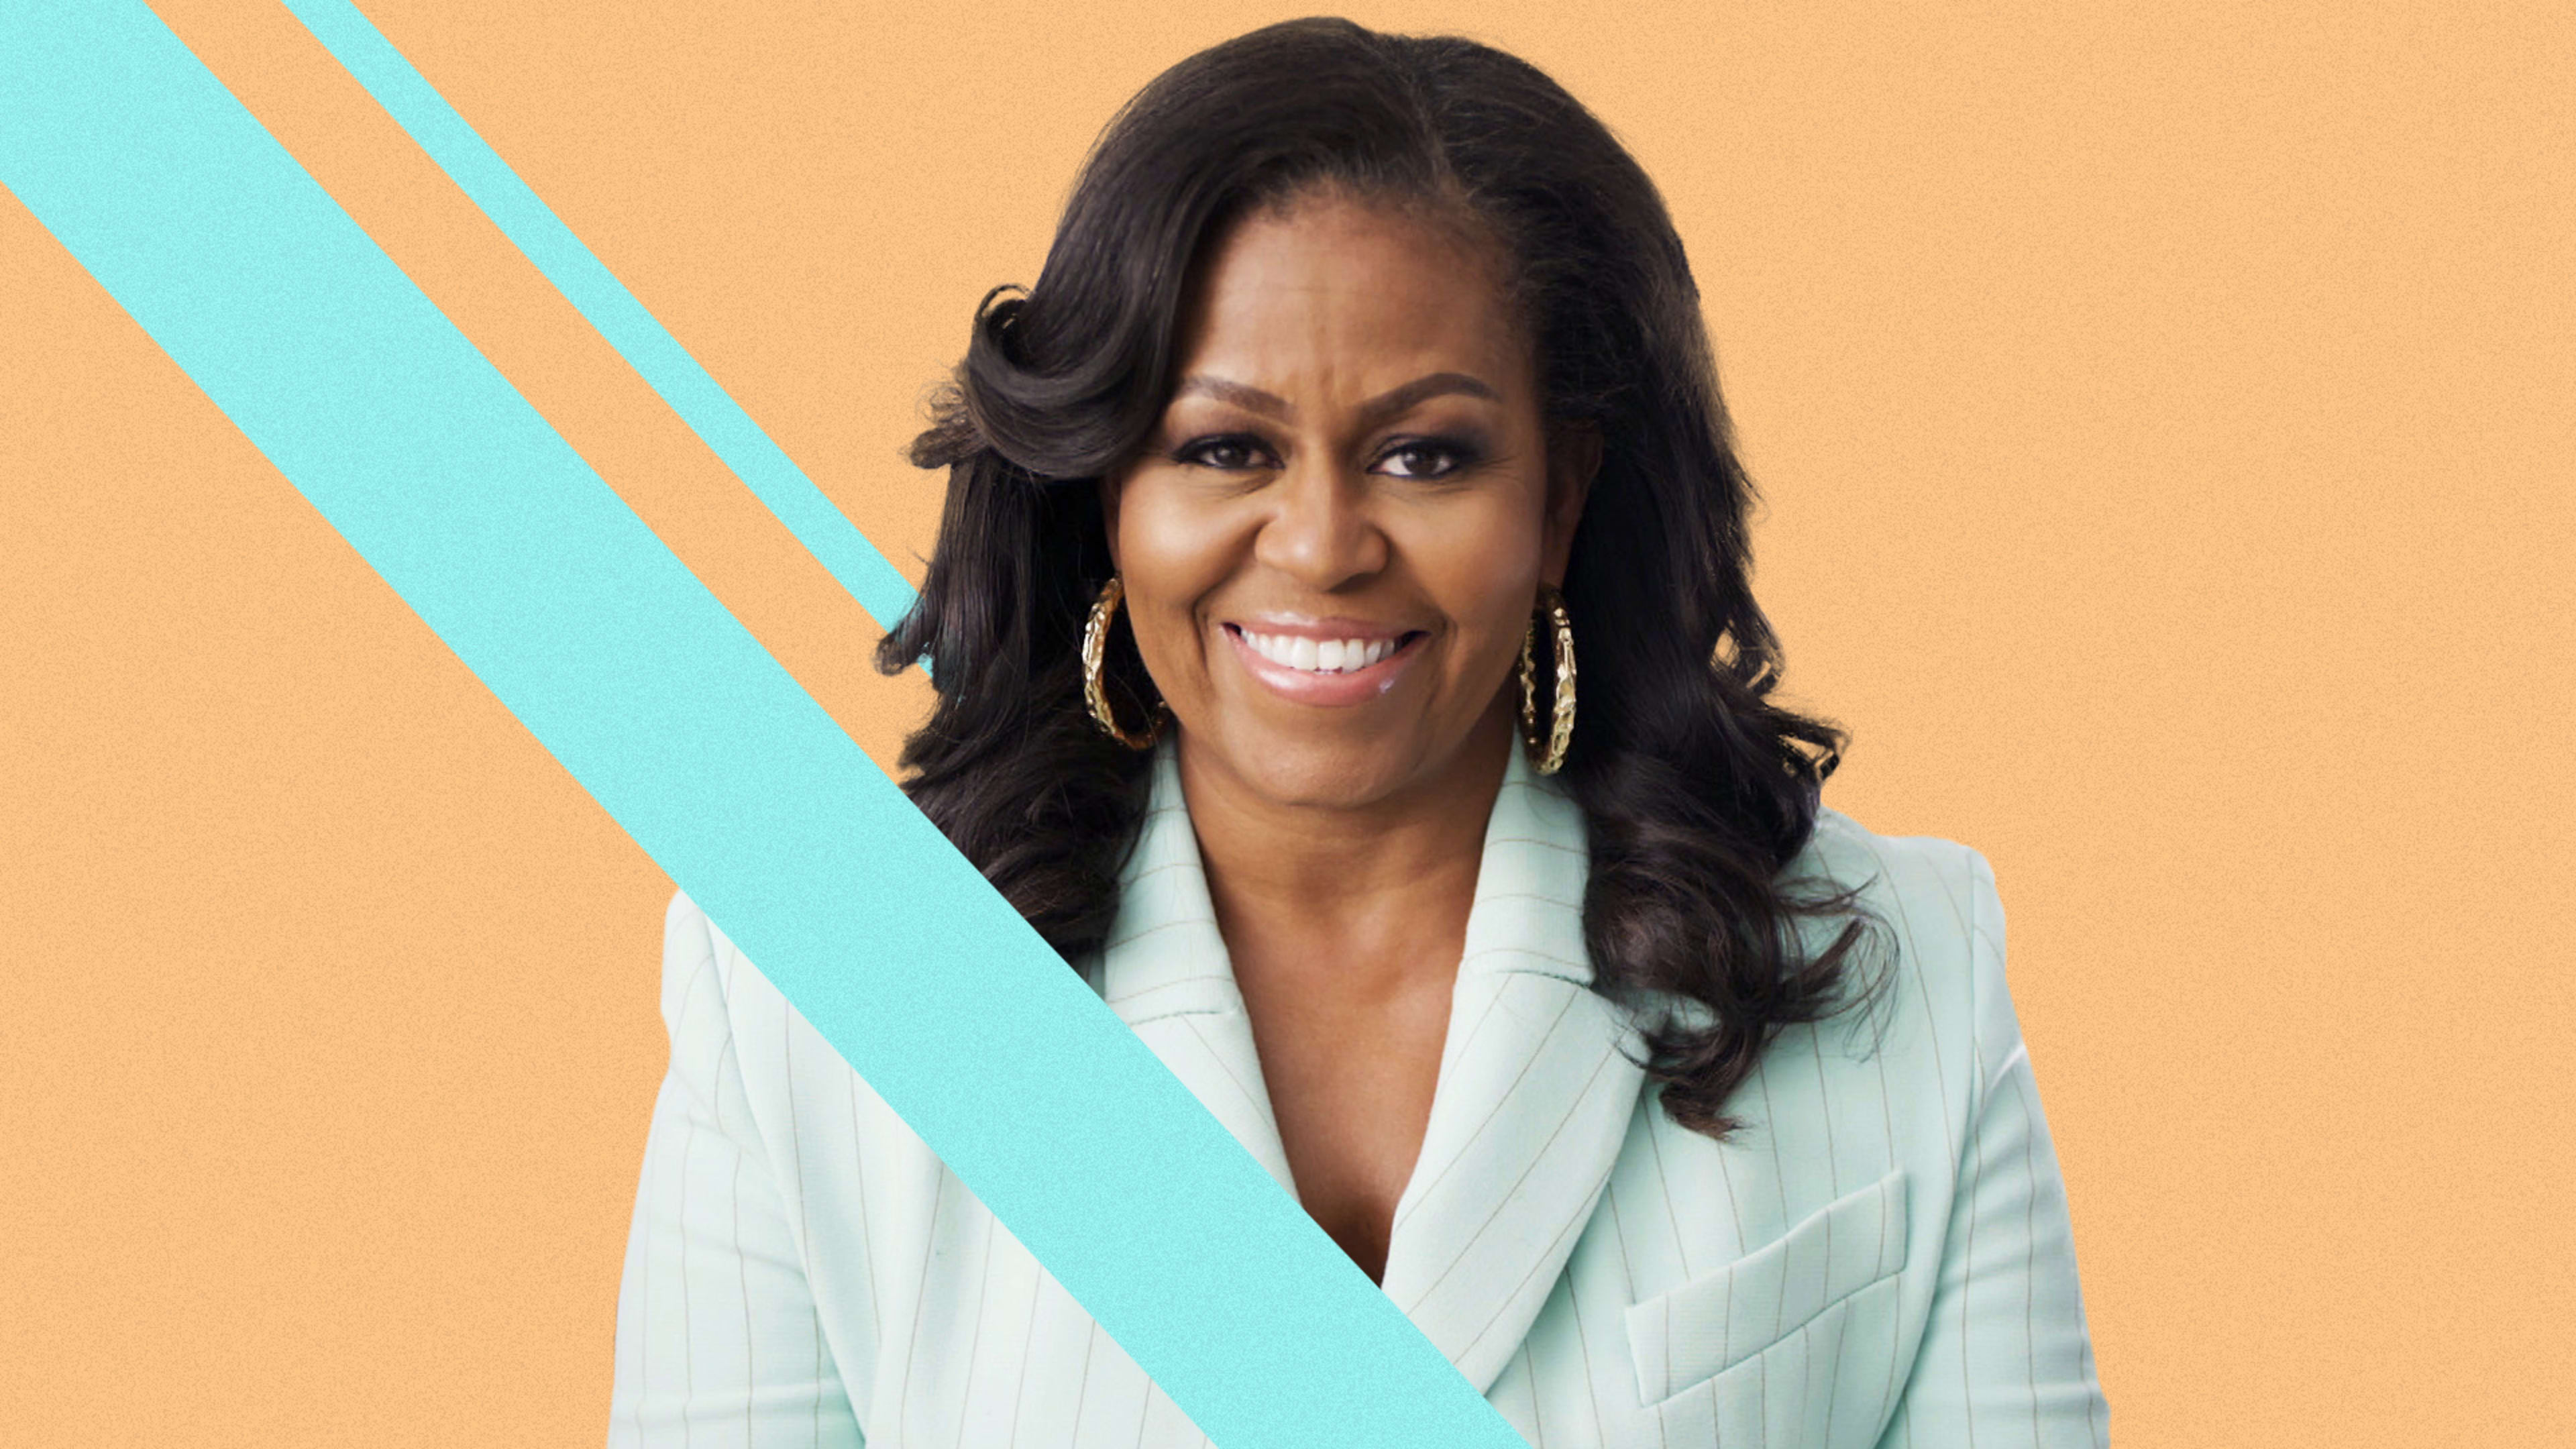 Exclusive video: Michelle Obama says the private sector should help end food insecurity